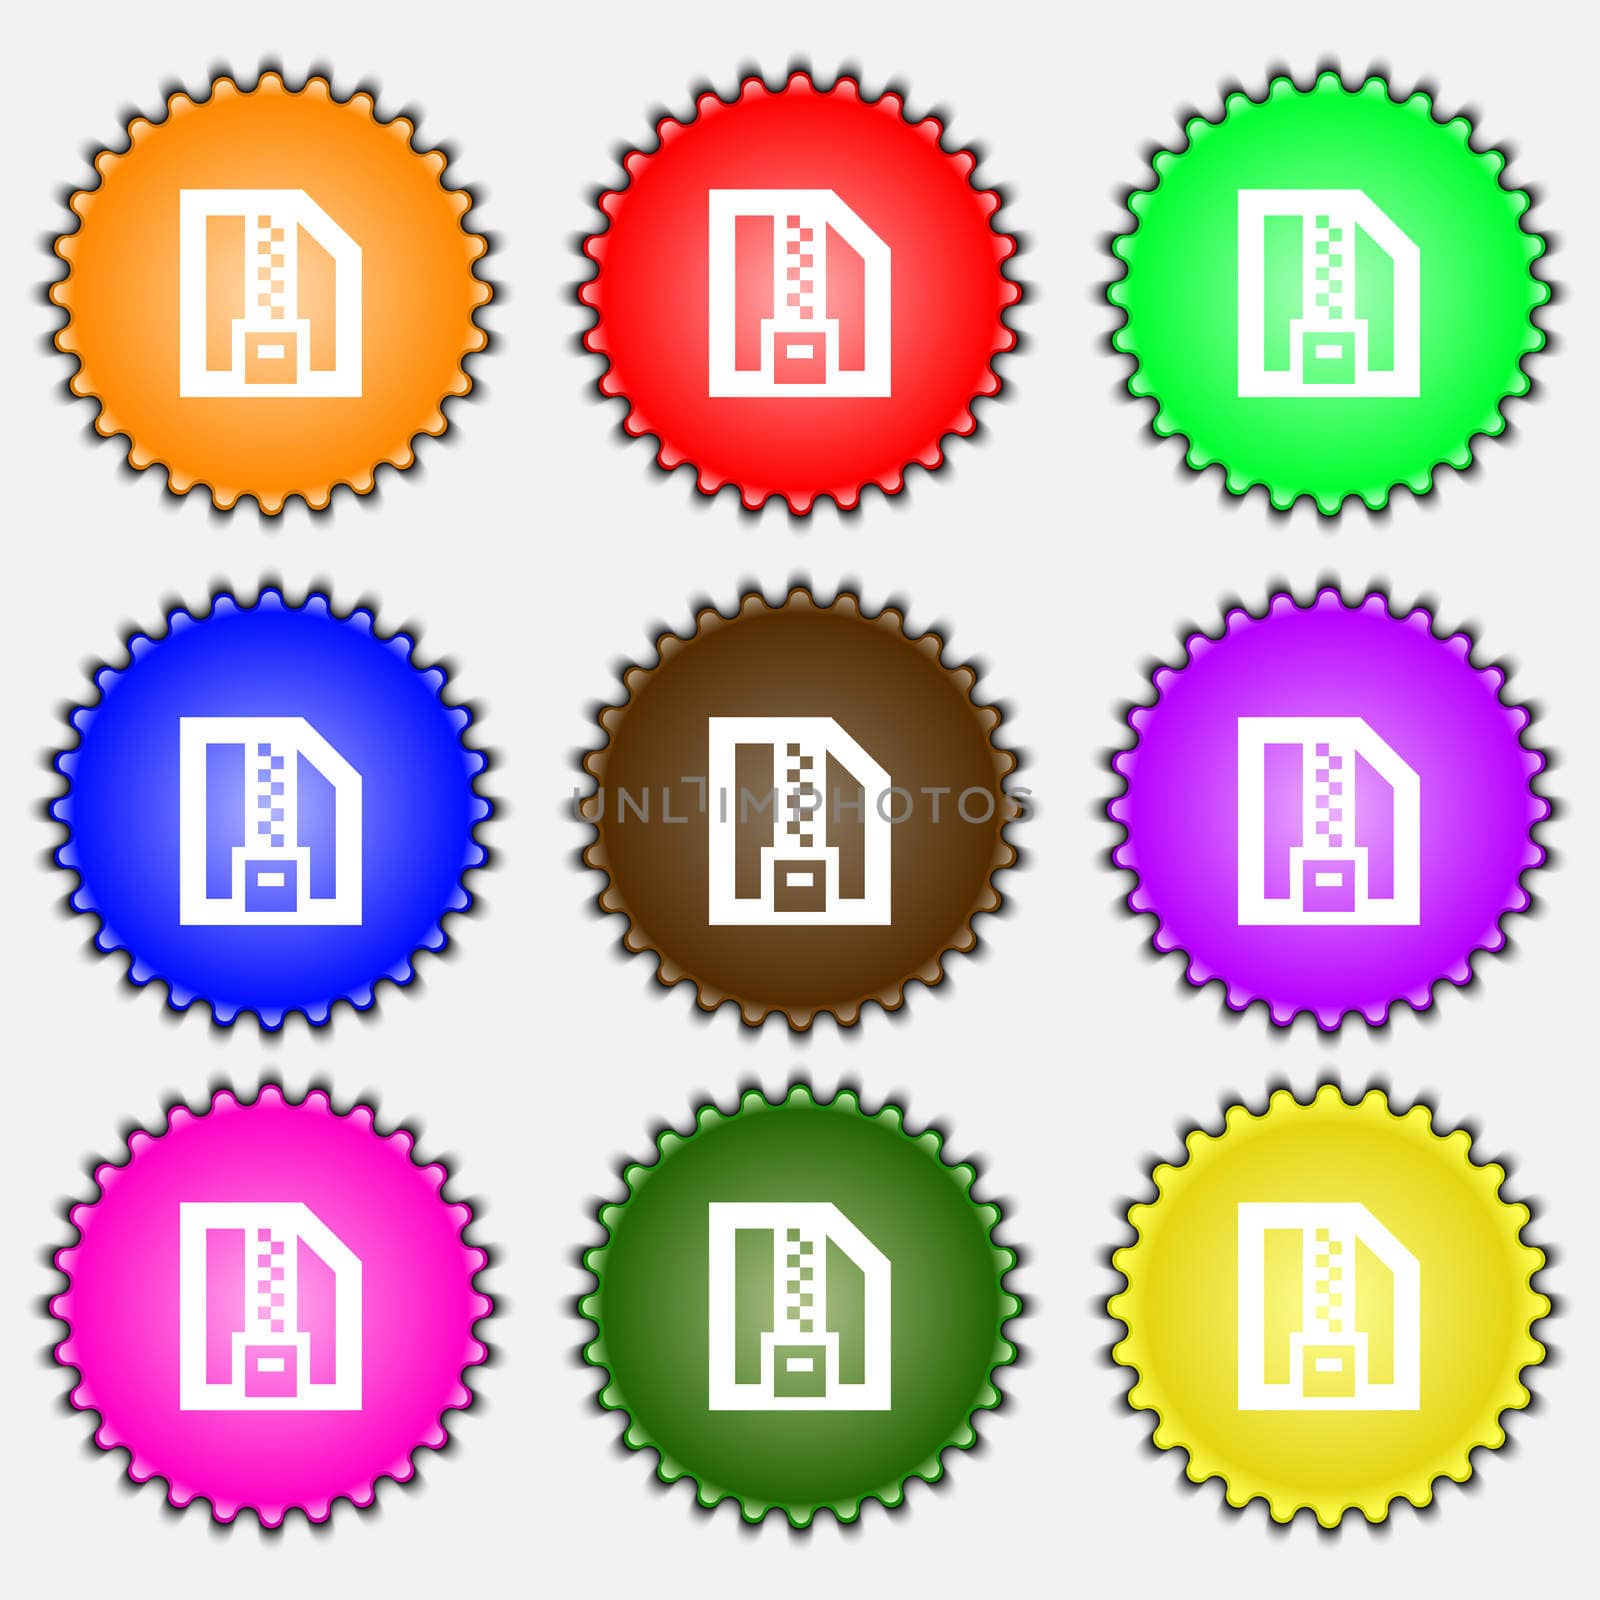 Archive file, Download compressed, ZIP zipped icon sign. A set of nine different colored labels. illustration 